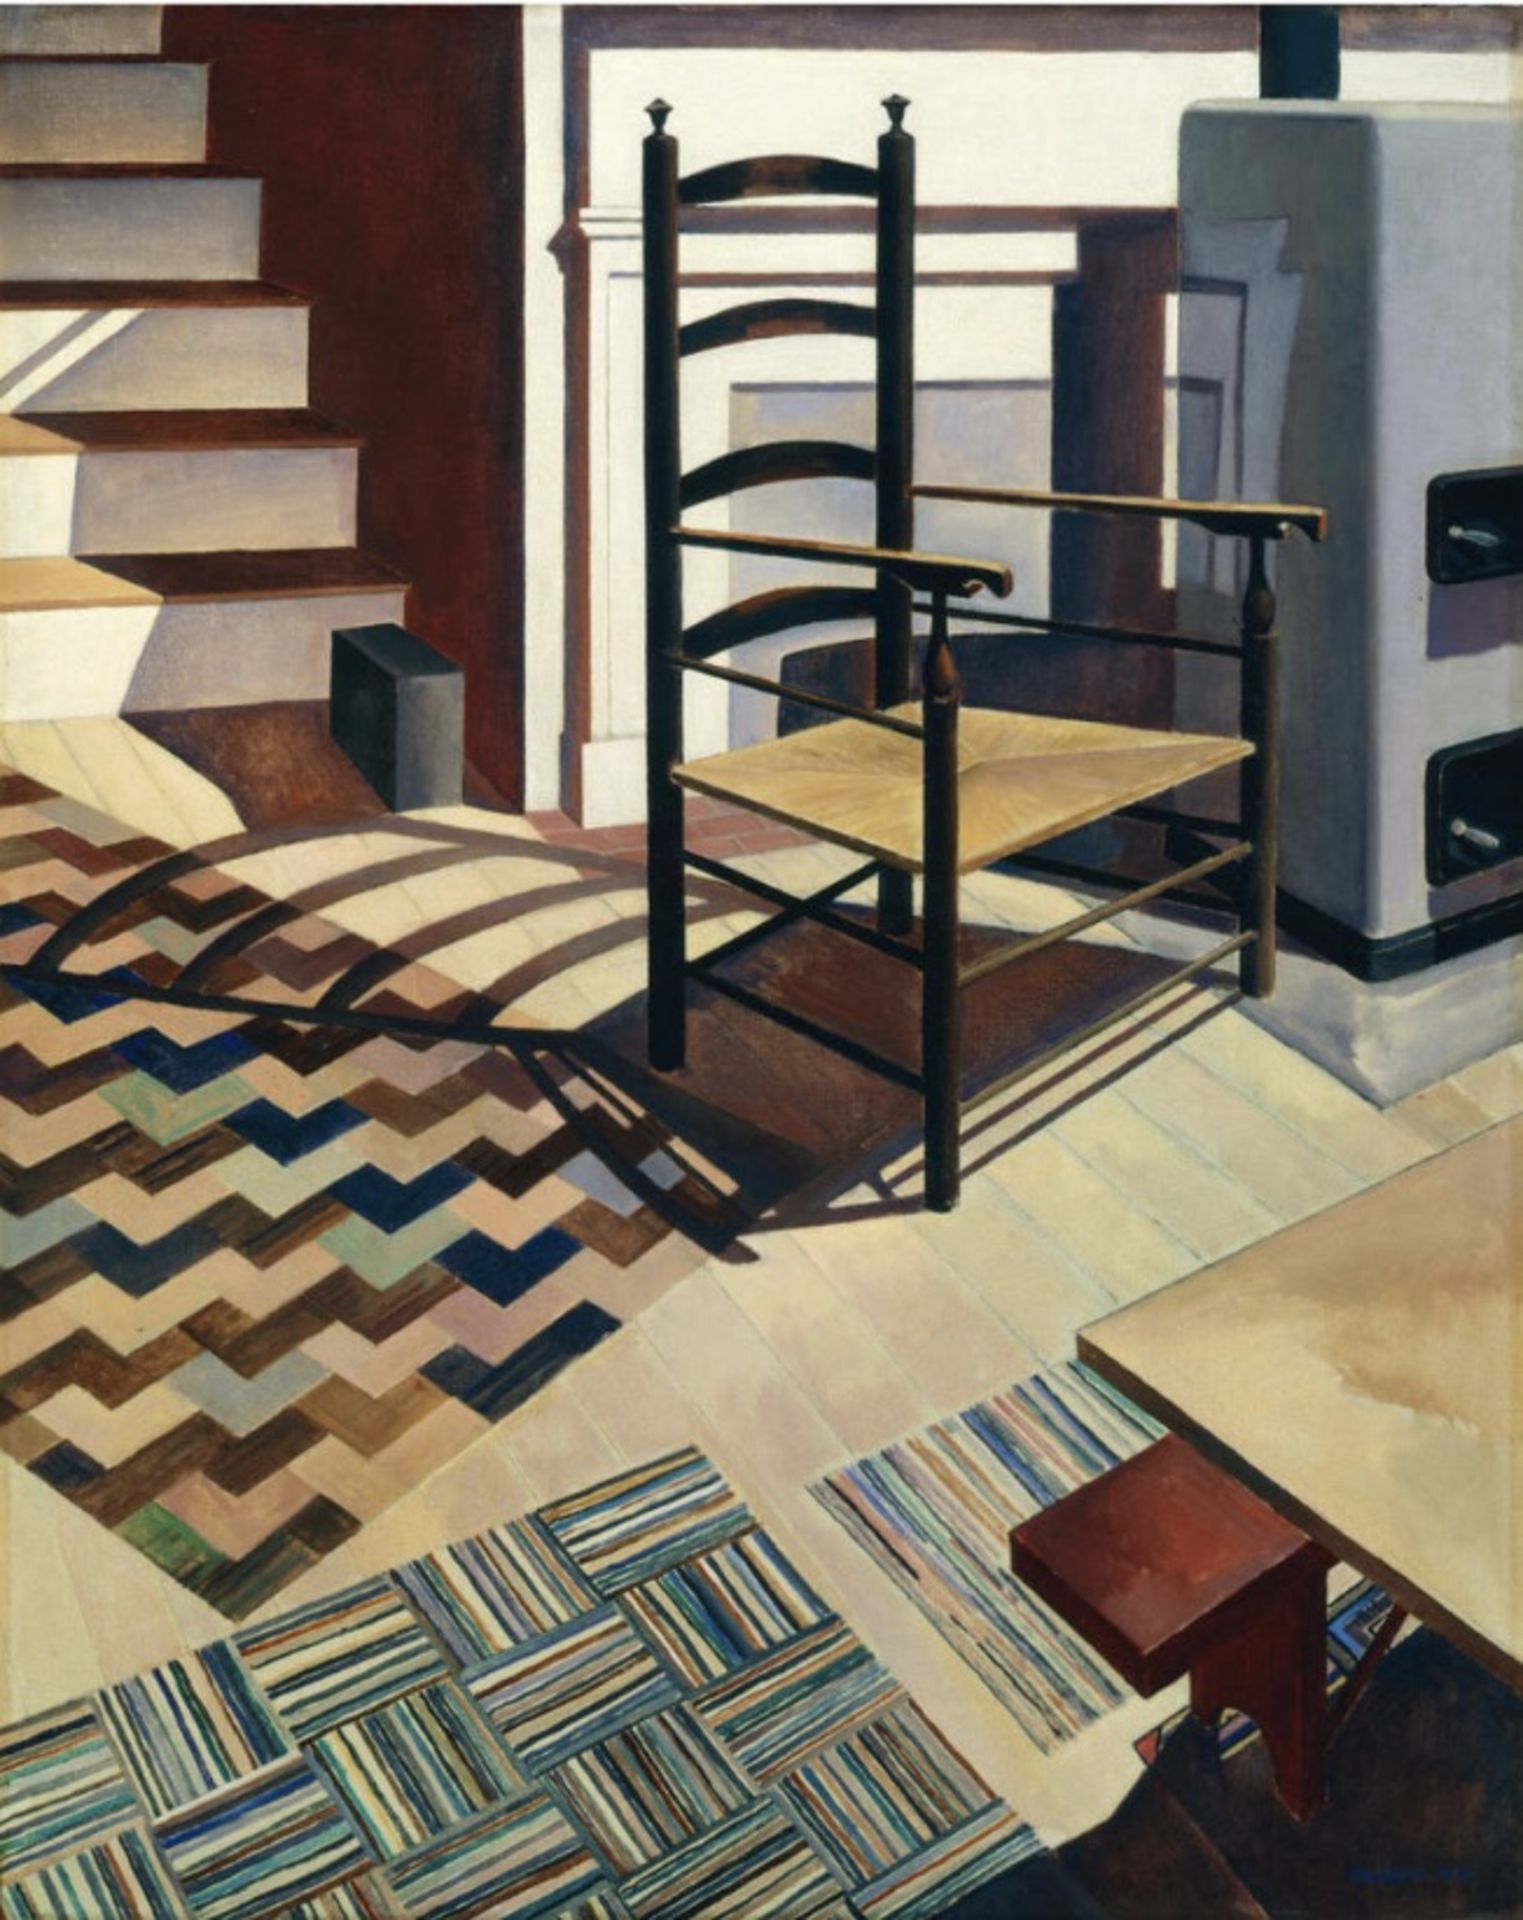 Charles Sheeler "Home, Sweet Home, 1931" Offset Lithograph